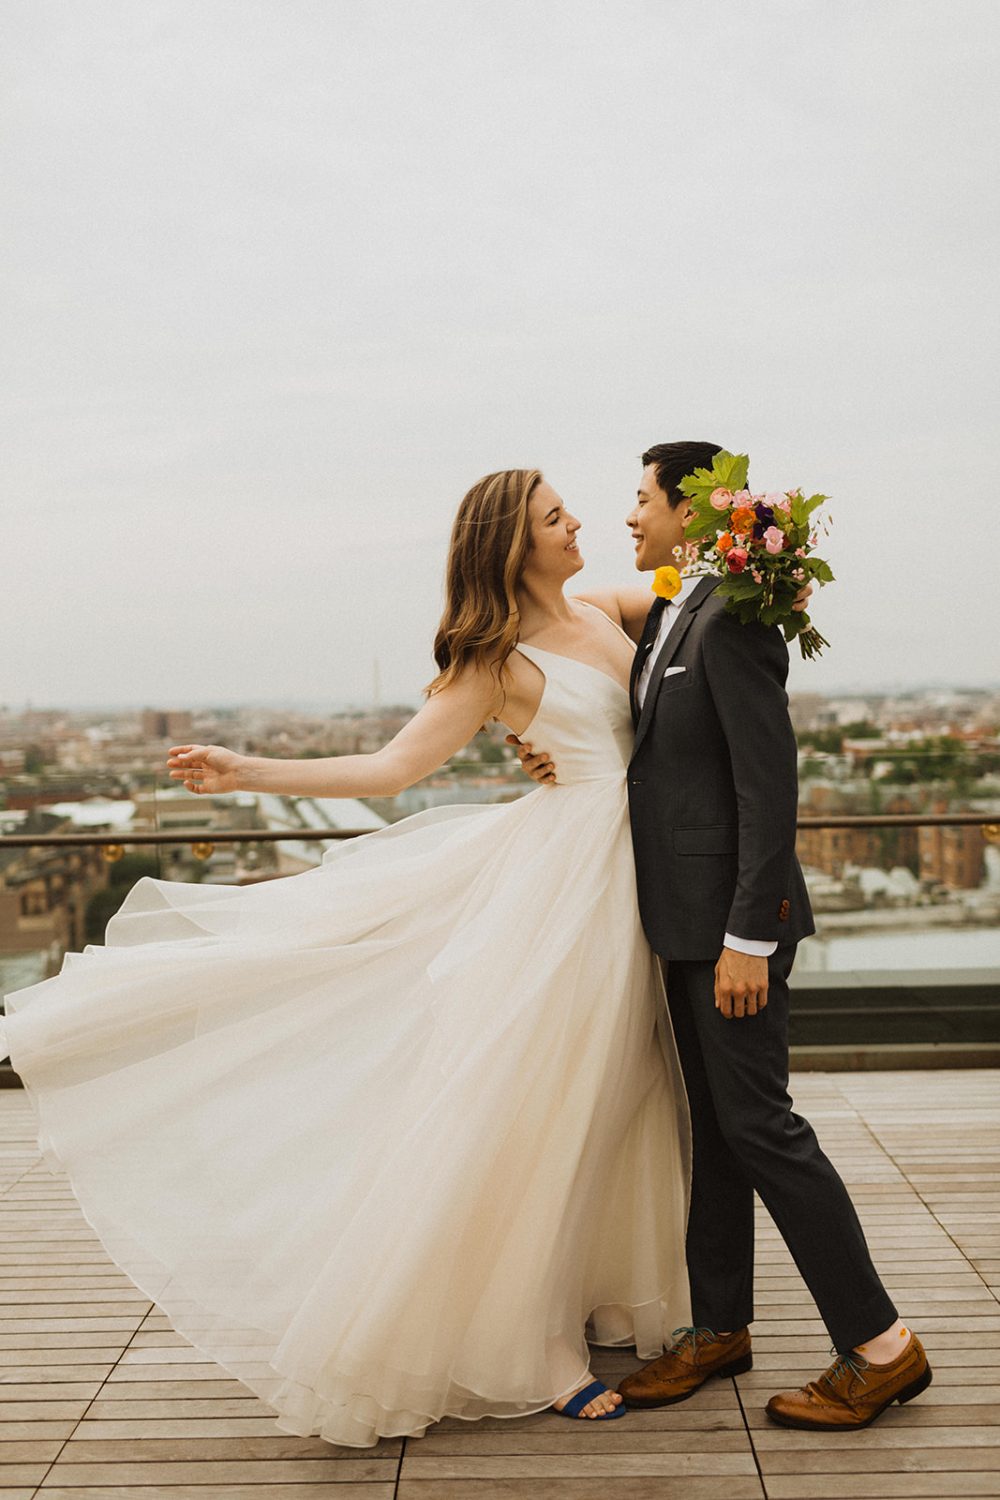 Couple embraces with flowing wedding dress on the line dc hotel rooftop